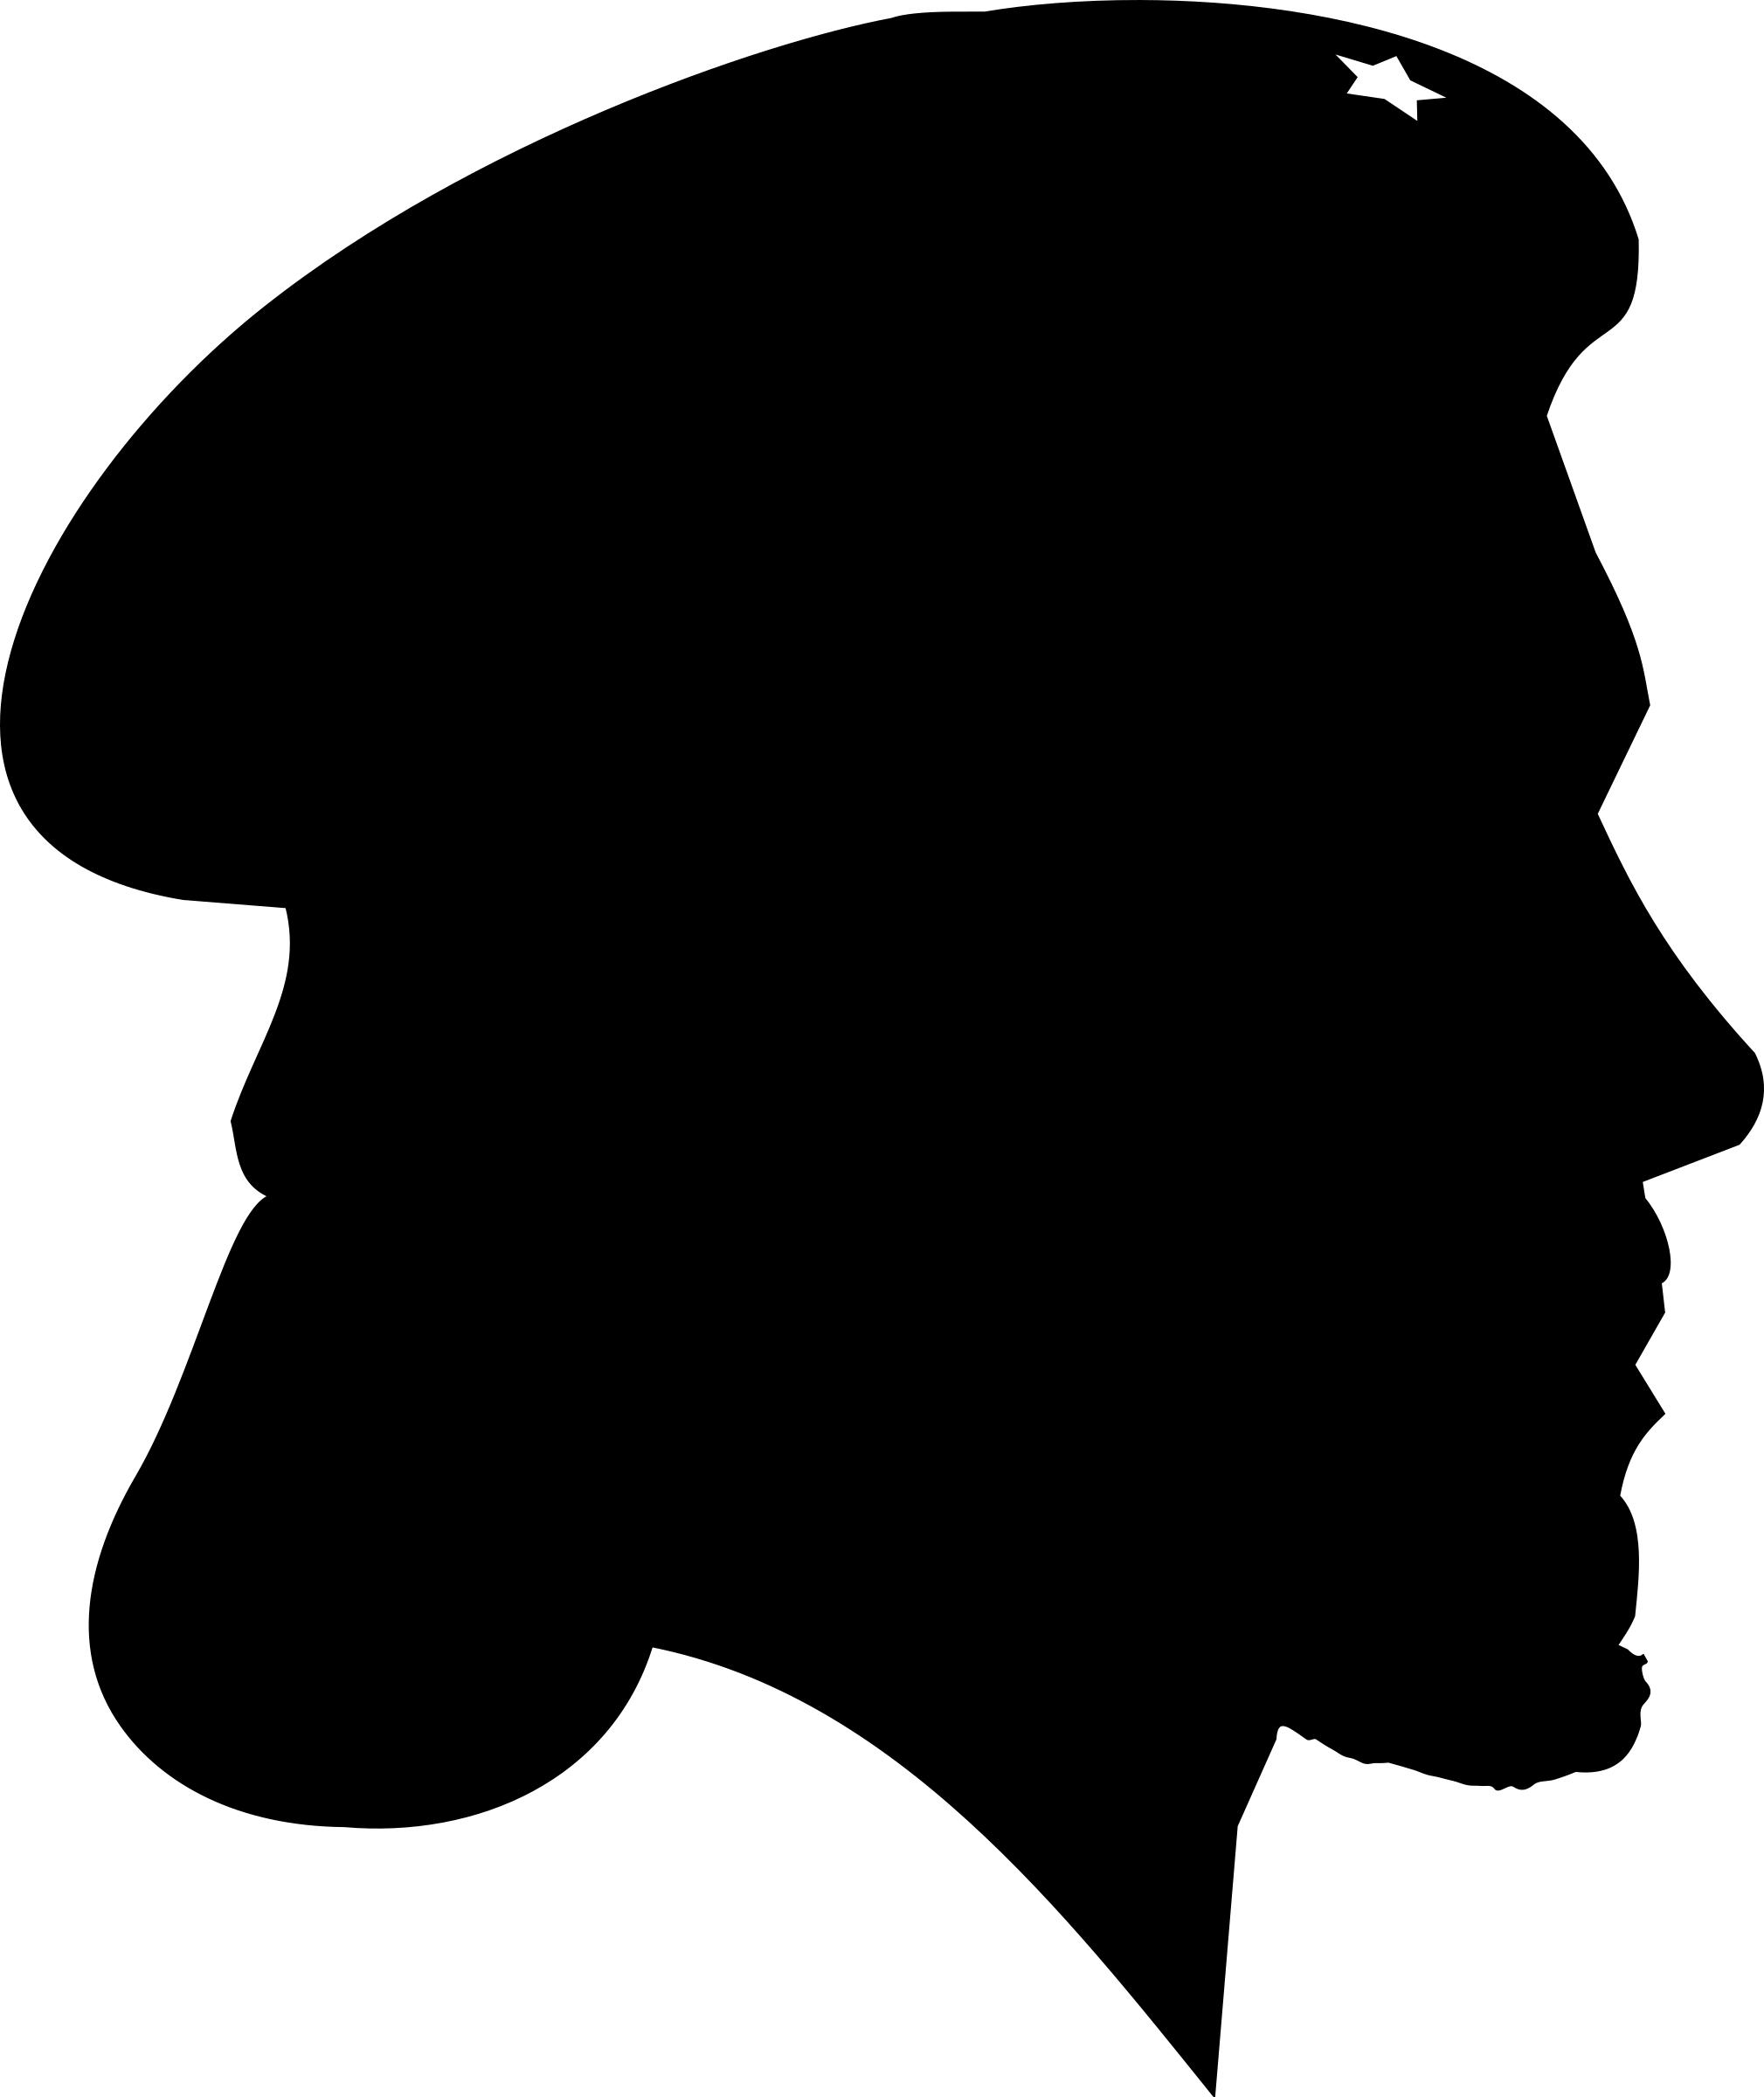 Revolutionary Silhouette Profile png